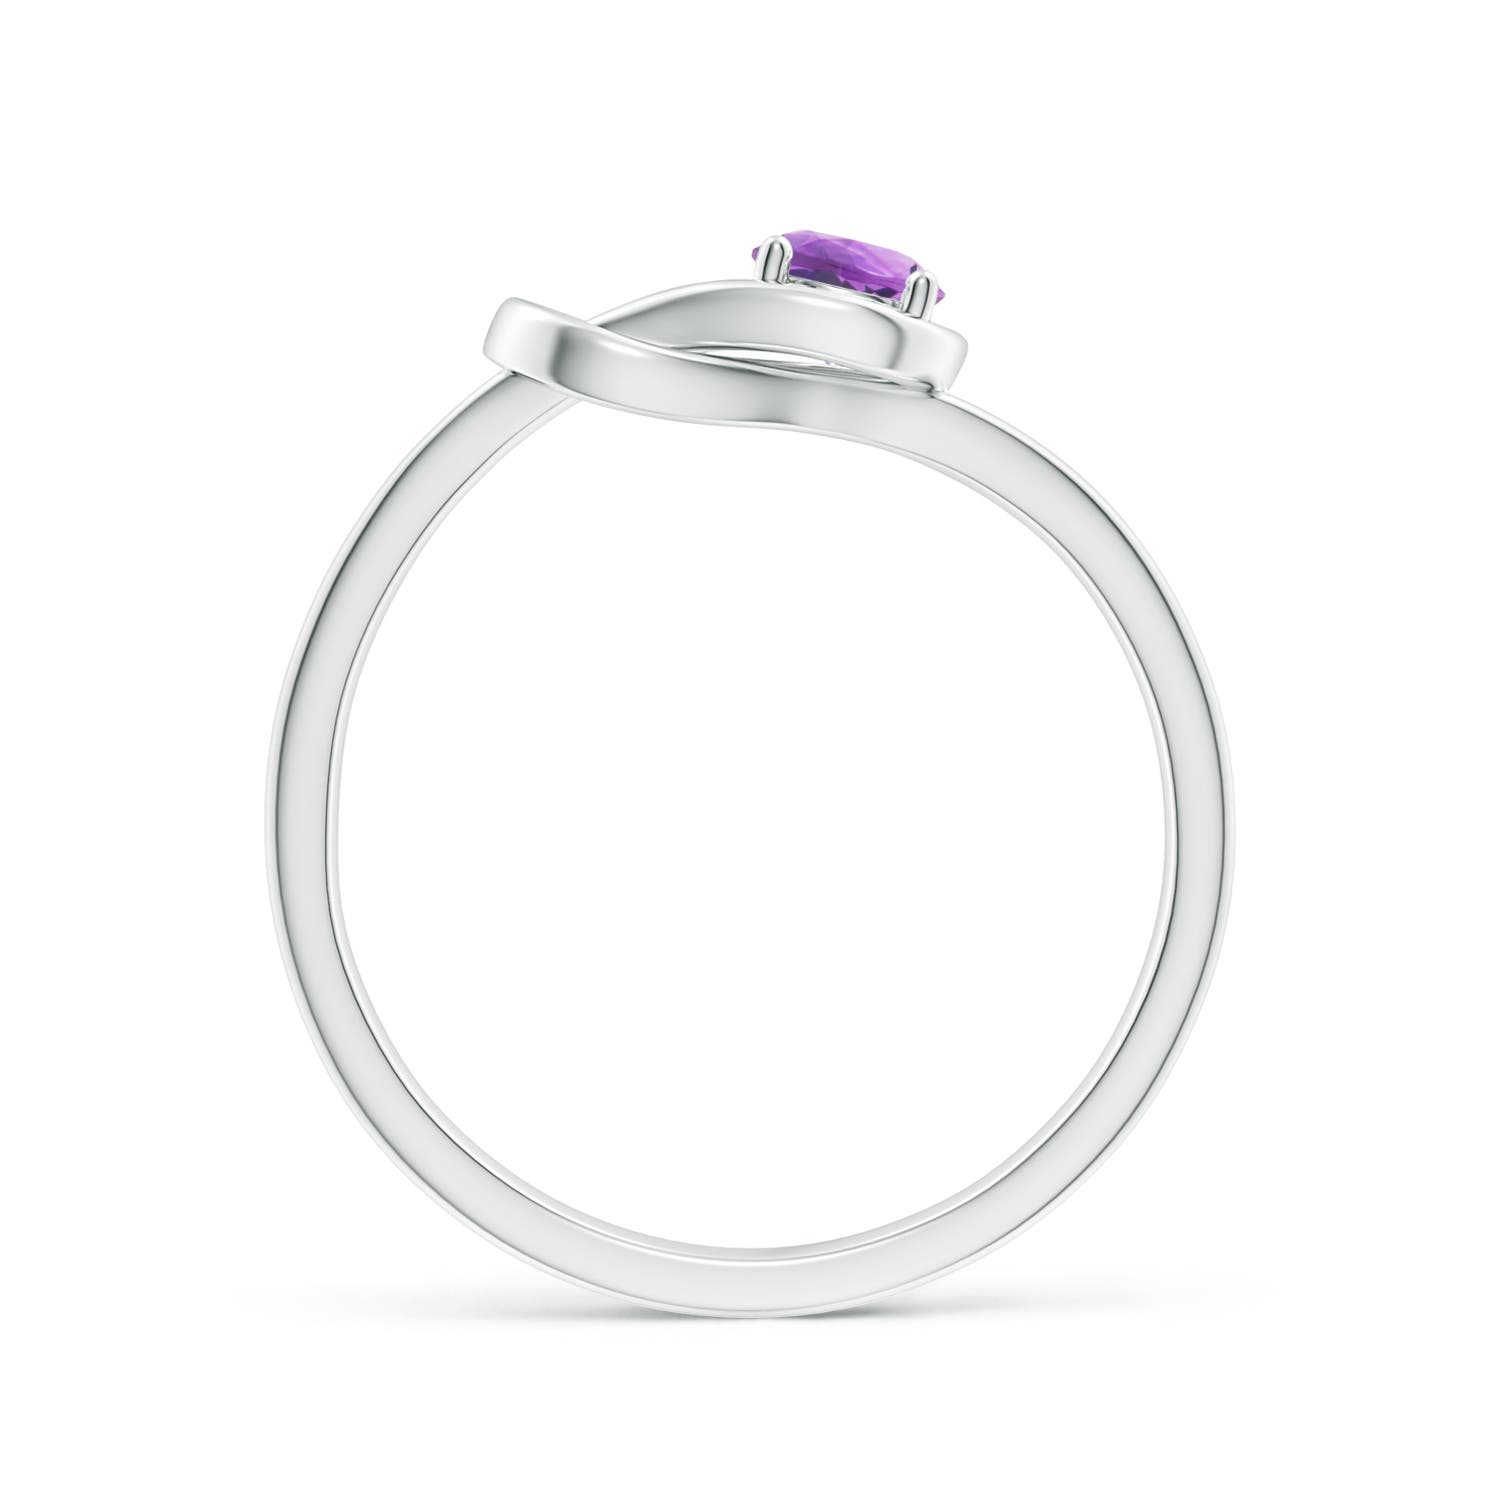 A - Amethyst / 0.25 CT / 14 KT White Gold